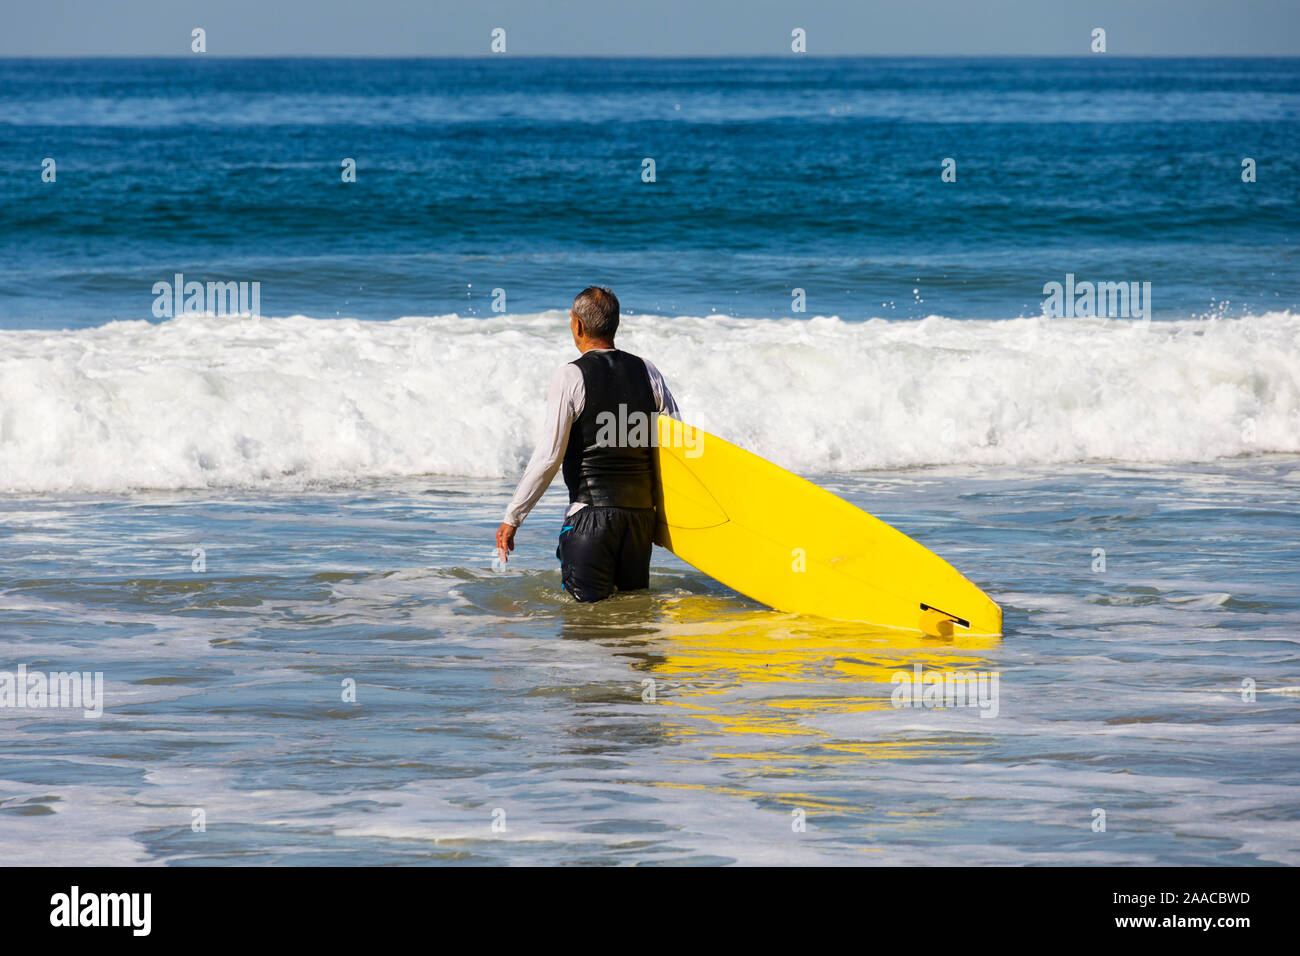 An older man takes his yellow surf board into the sea, Santa Monica beach, California, United States of america. USA. October 2019 Stock Photo